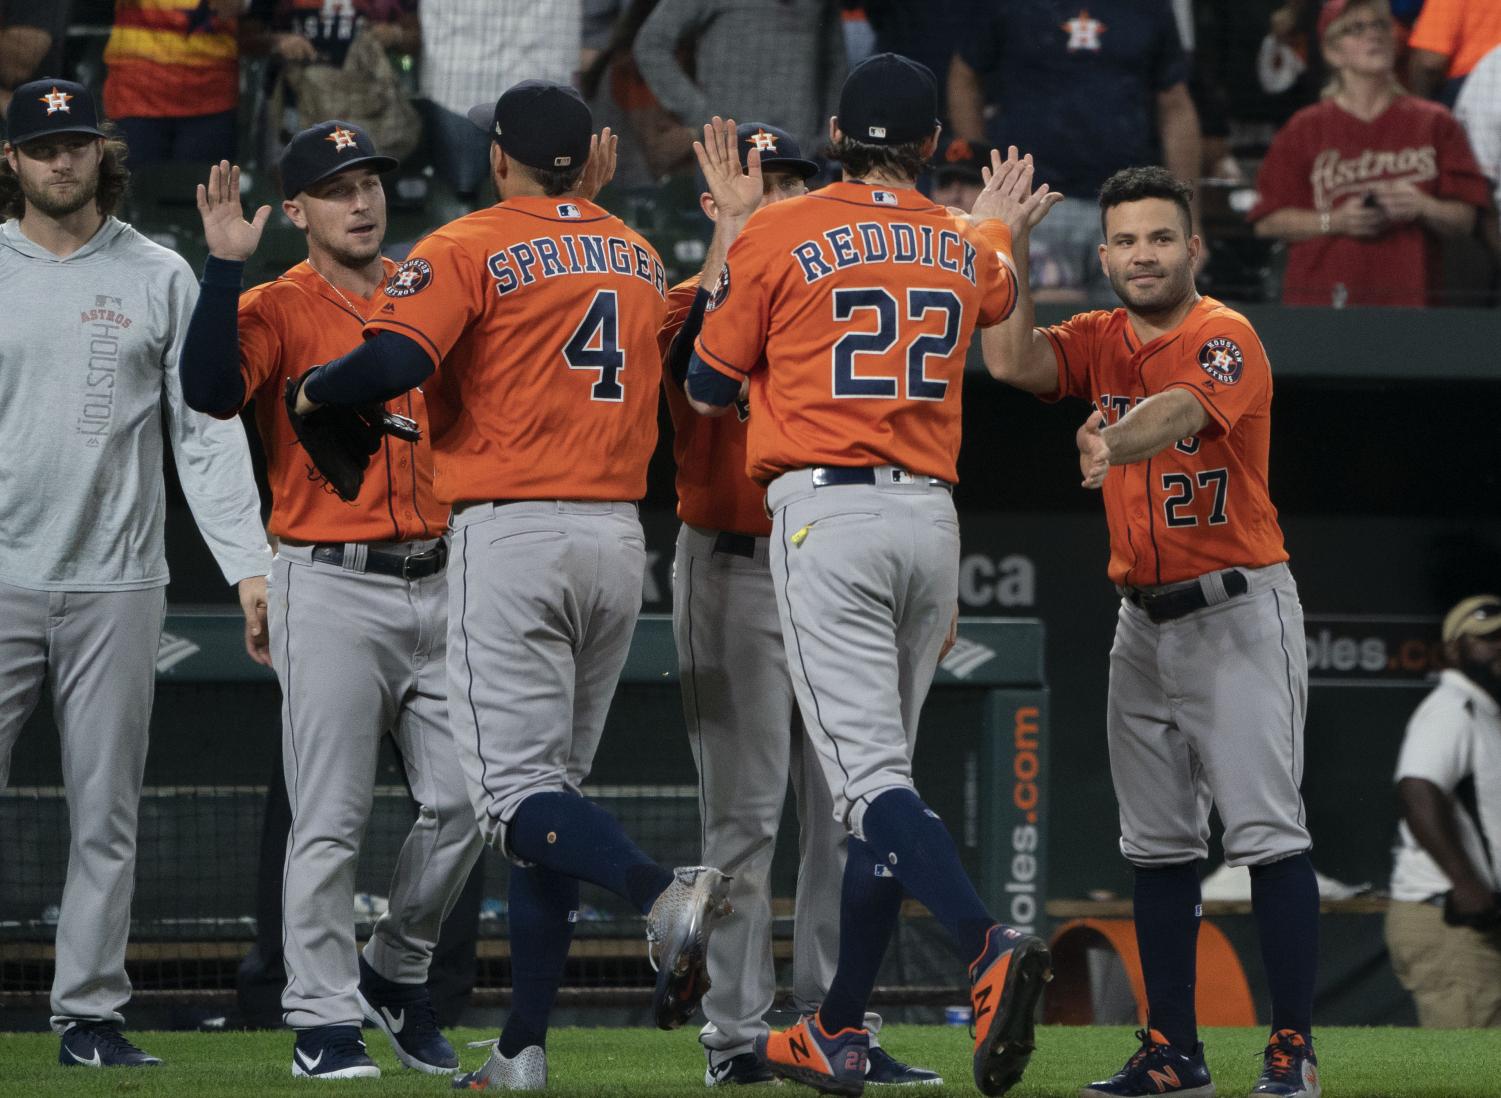 Former Houston pitcher Mike Fiers: Astros stole signs electronically in 2017